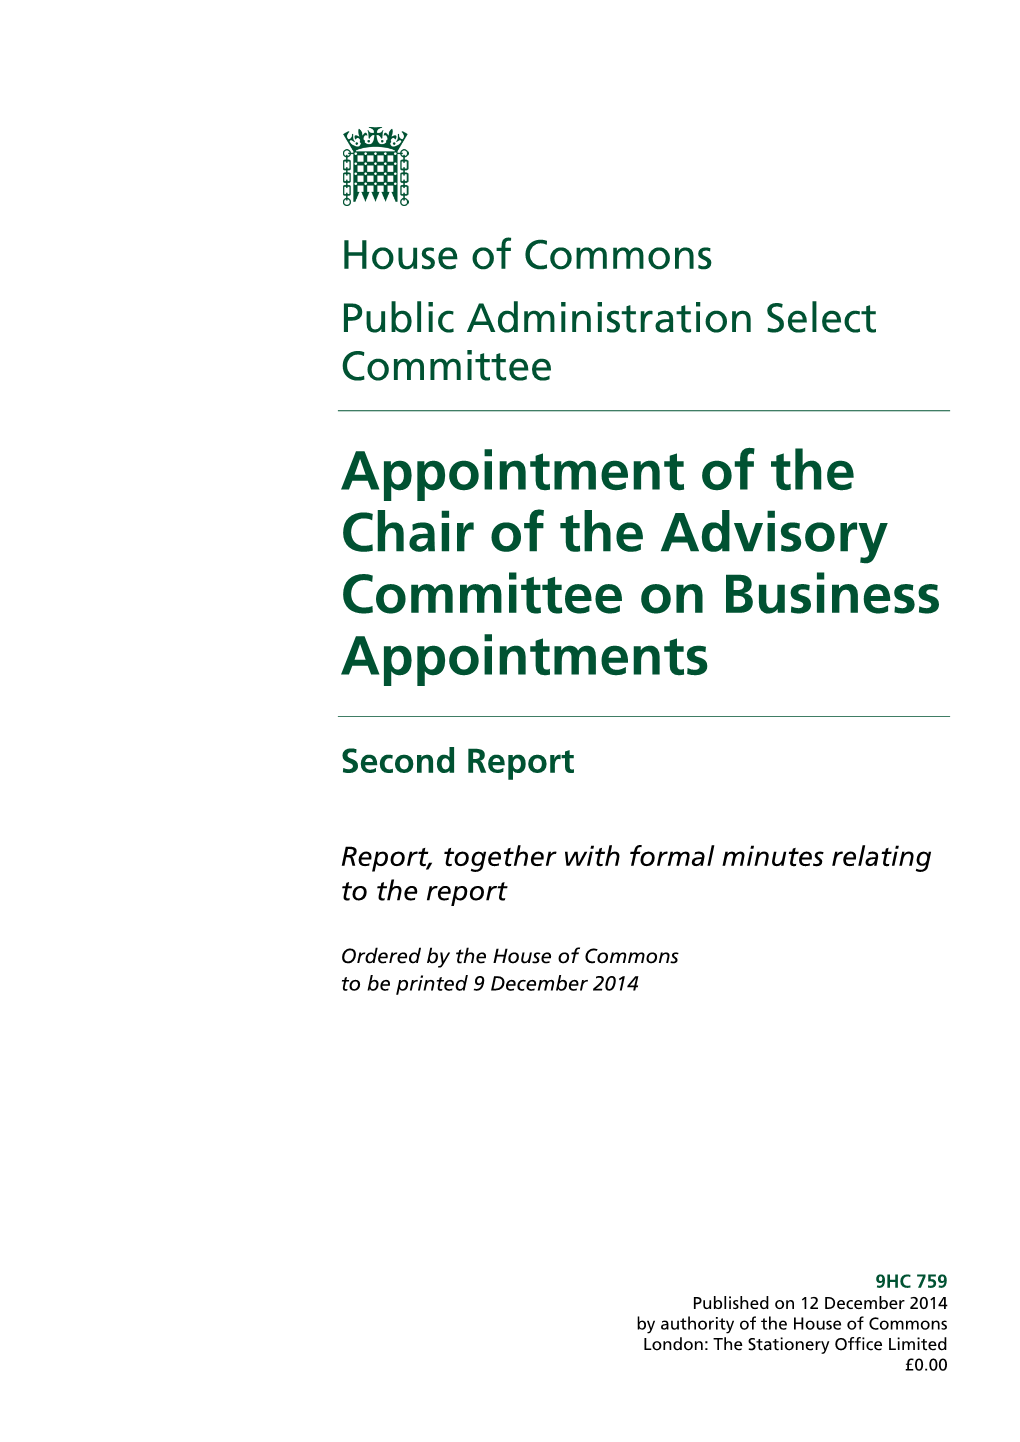 Appointment of the Chair of the Advisory Committee on Business Appointments